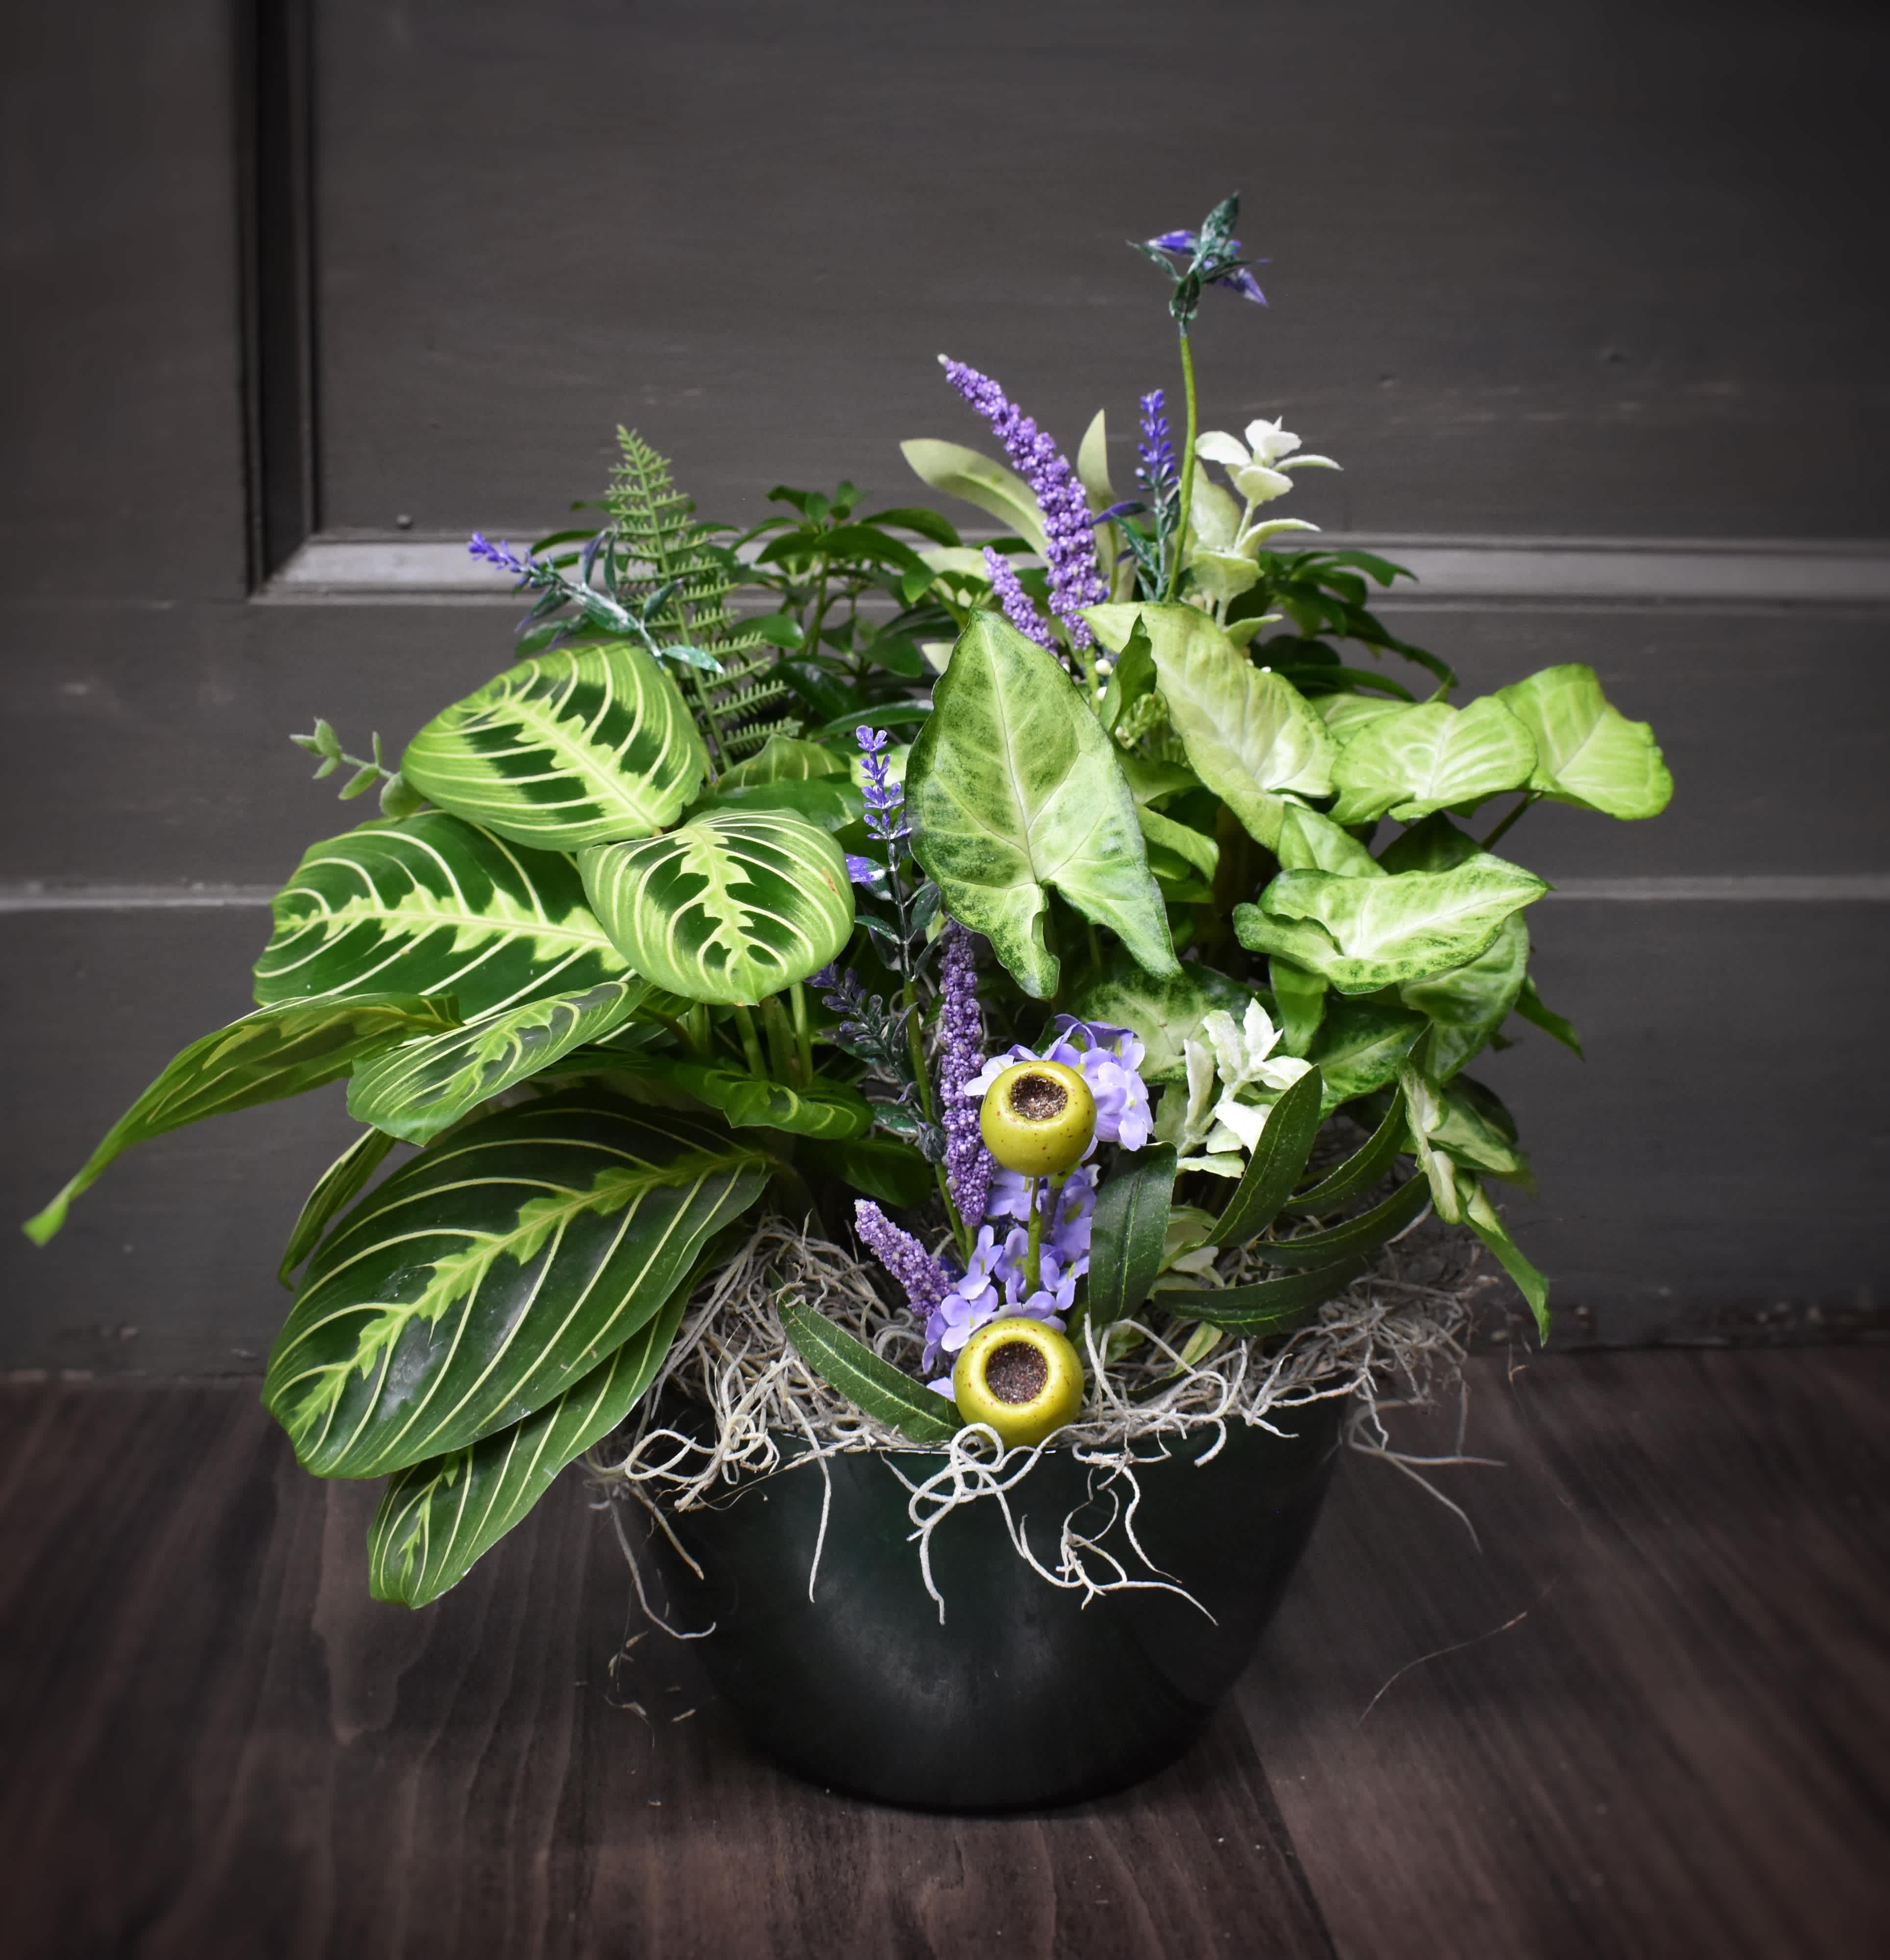 Staying Olive Dishgarden - We've created this tabletop dishgarden using a beautiful colored glass bowl and filling it with lush green plants and accented with silk flowers.